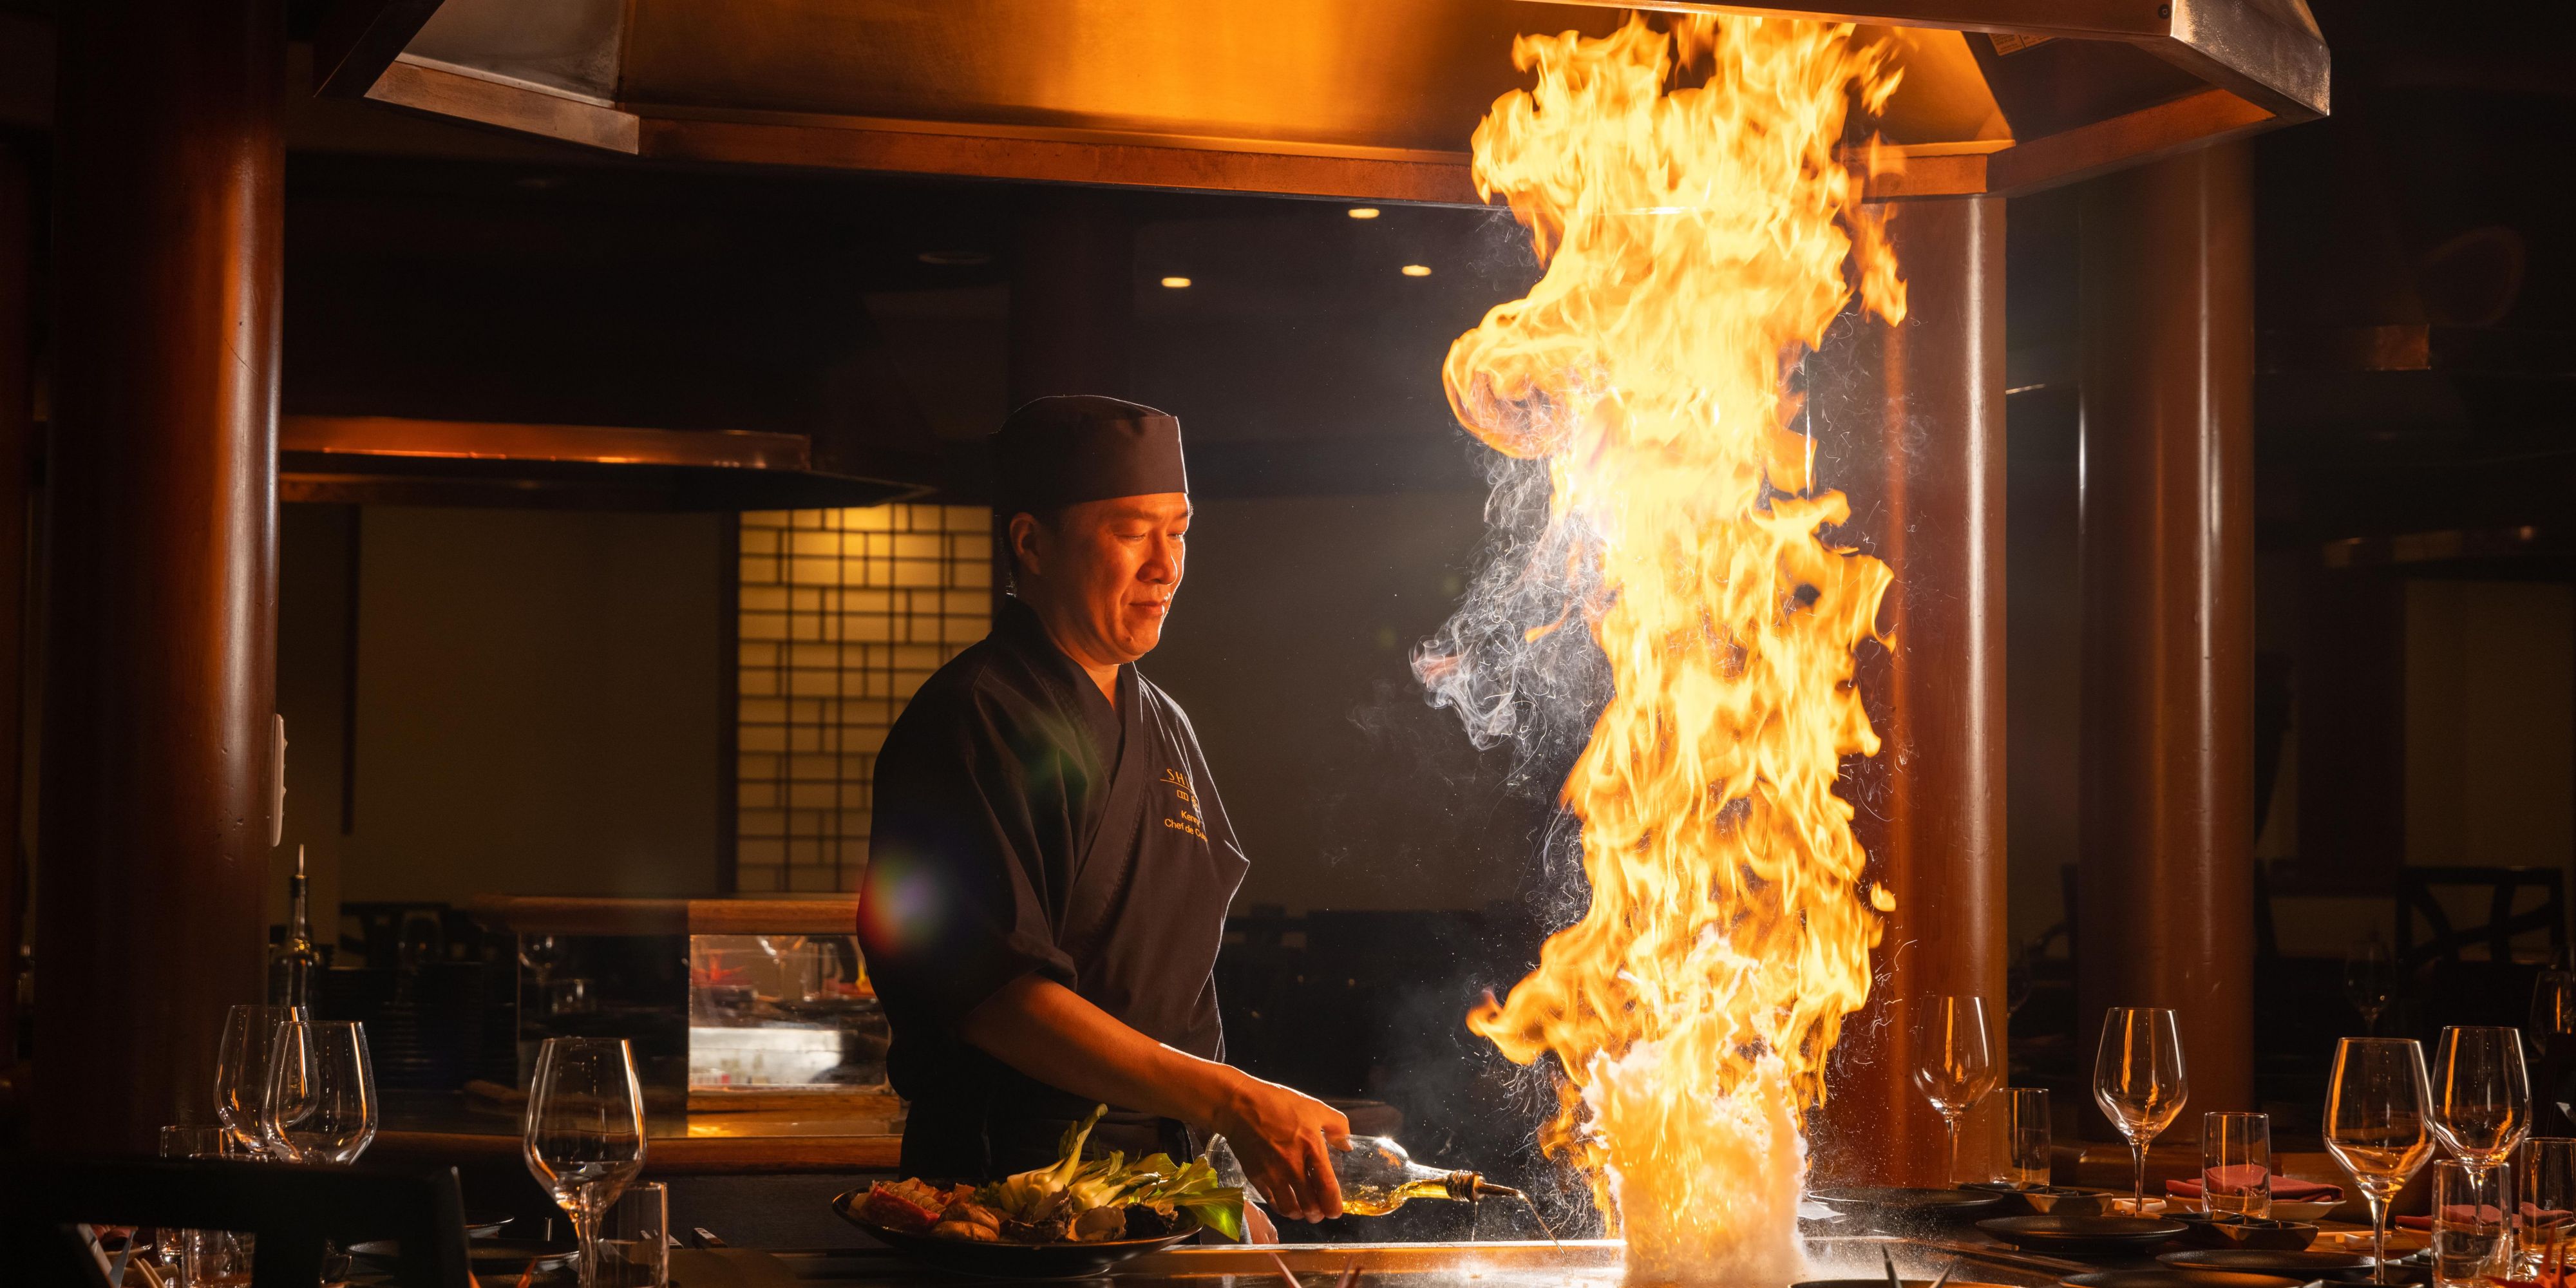 Experience award-winning authentic Japanese cuisine at Shiki. Shiki offers world-class service and unique dining experience, combining seasonal produce with exceptional Japanese sushi and sashimi, tempura, and teppanyaki.